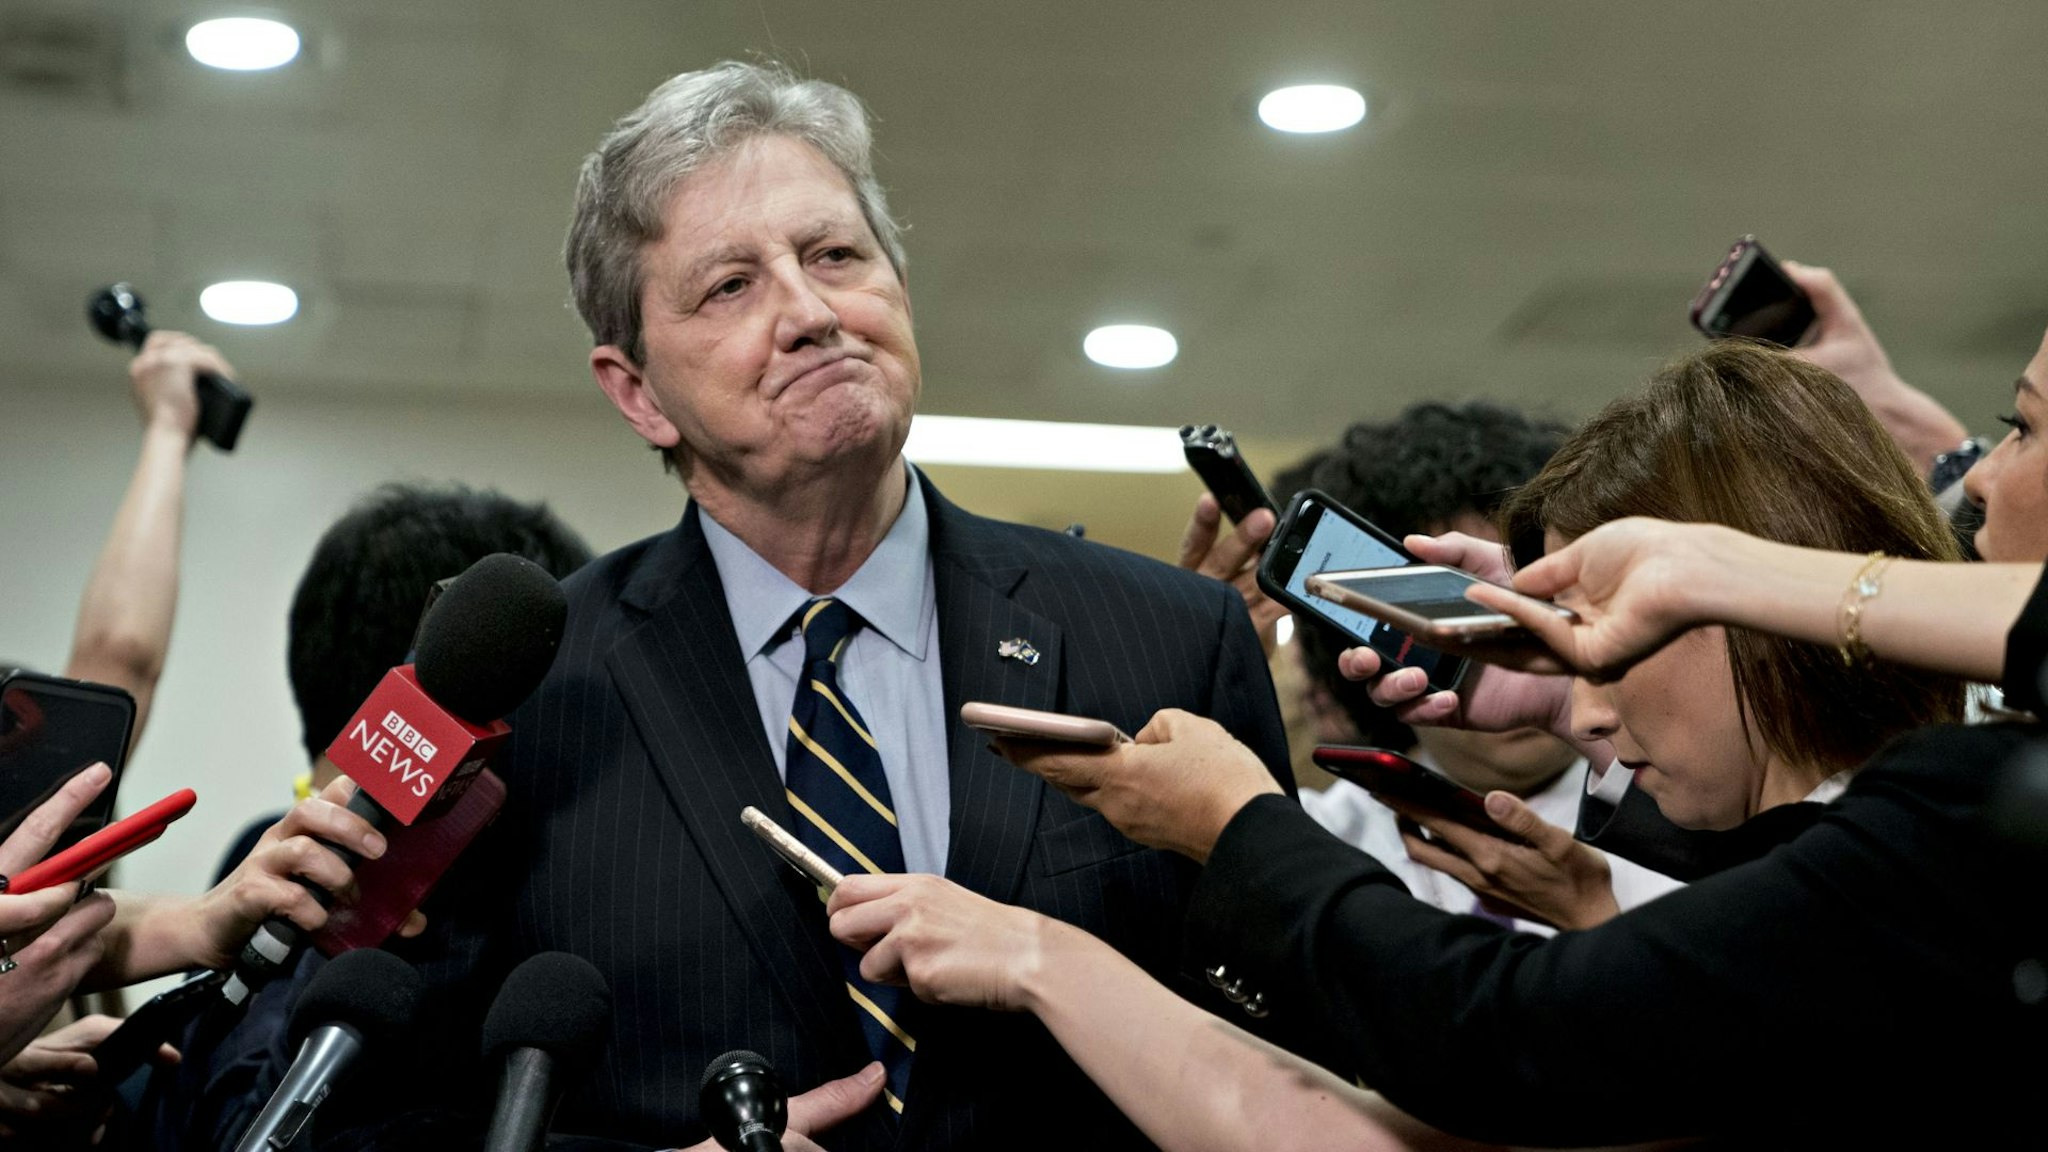 Senator John Kennedy, a Republican from Louisiana, pauses while speaking to members of the media after a briefing on Iran by Secretary of State Mike Pompeo and Acting U.S. Secretary of Defense Patrick Shanahan in the basement of the U.S. Capitol in Washington, D.C., U.S., on Tuesday, May 21, 2019.